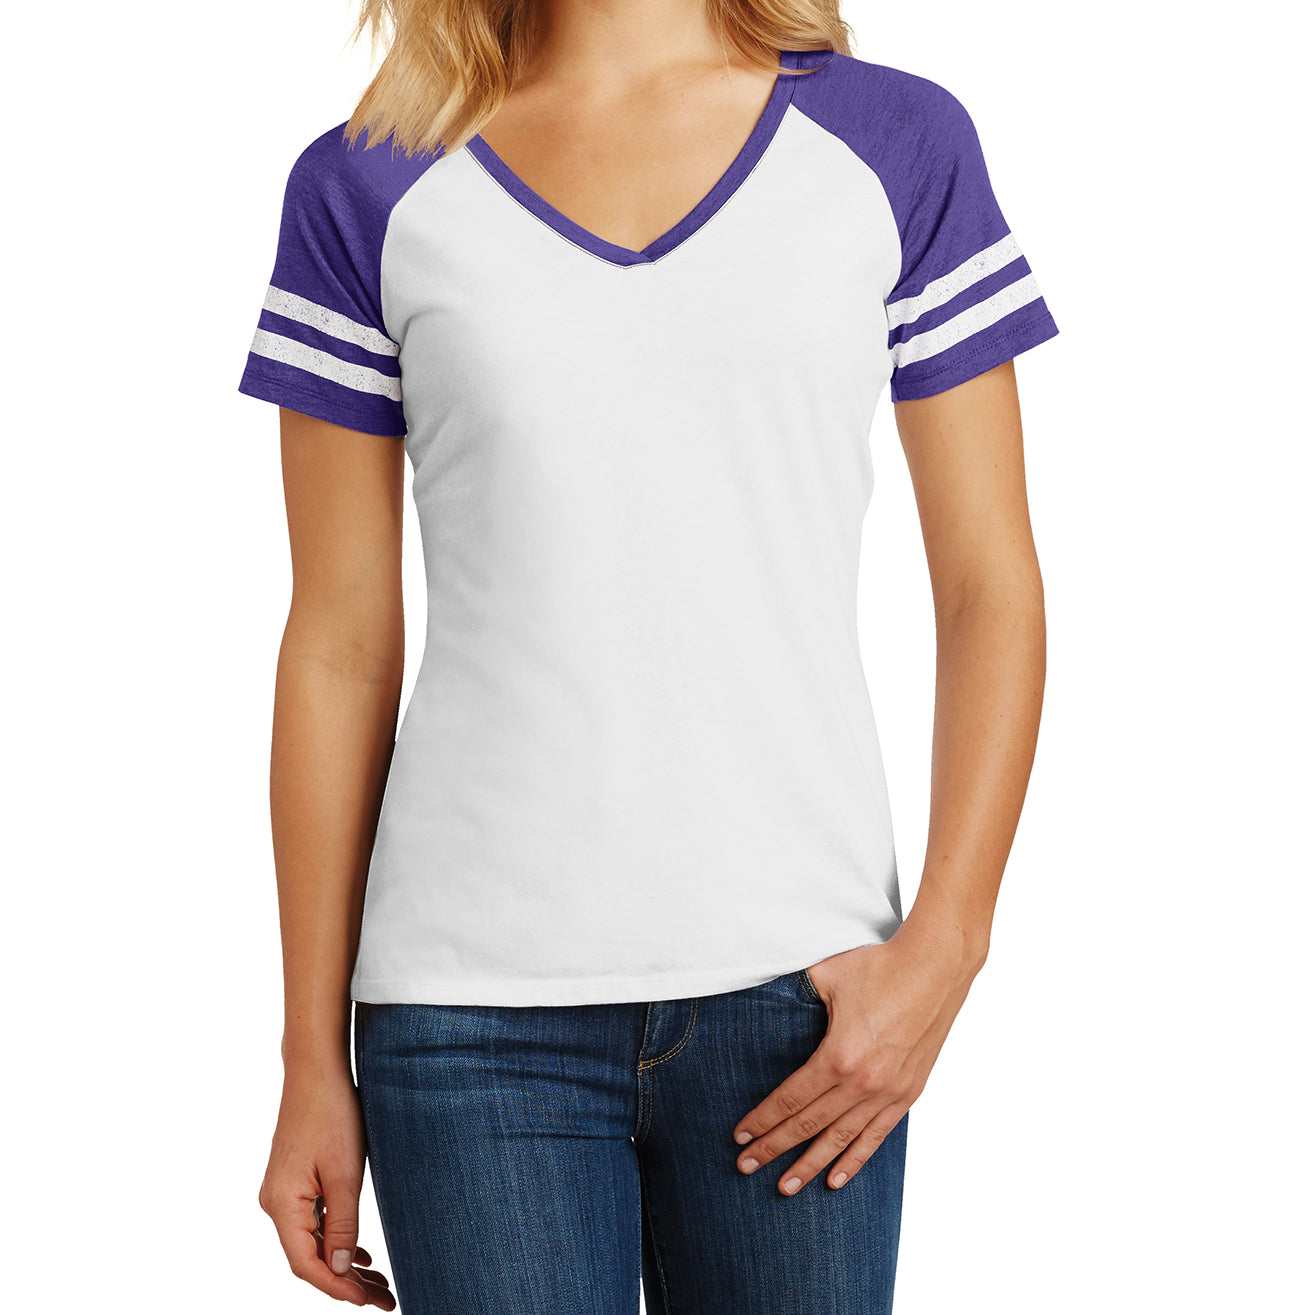 Womens Game V-Neck Tee - White/Heathered Purple - Front